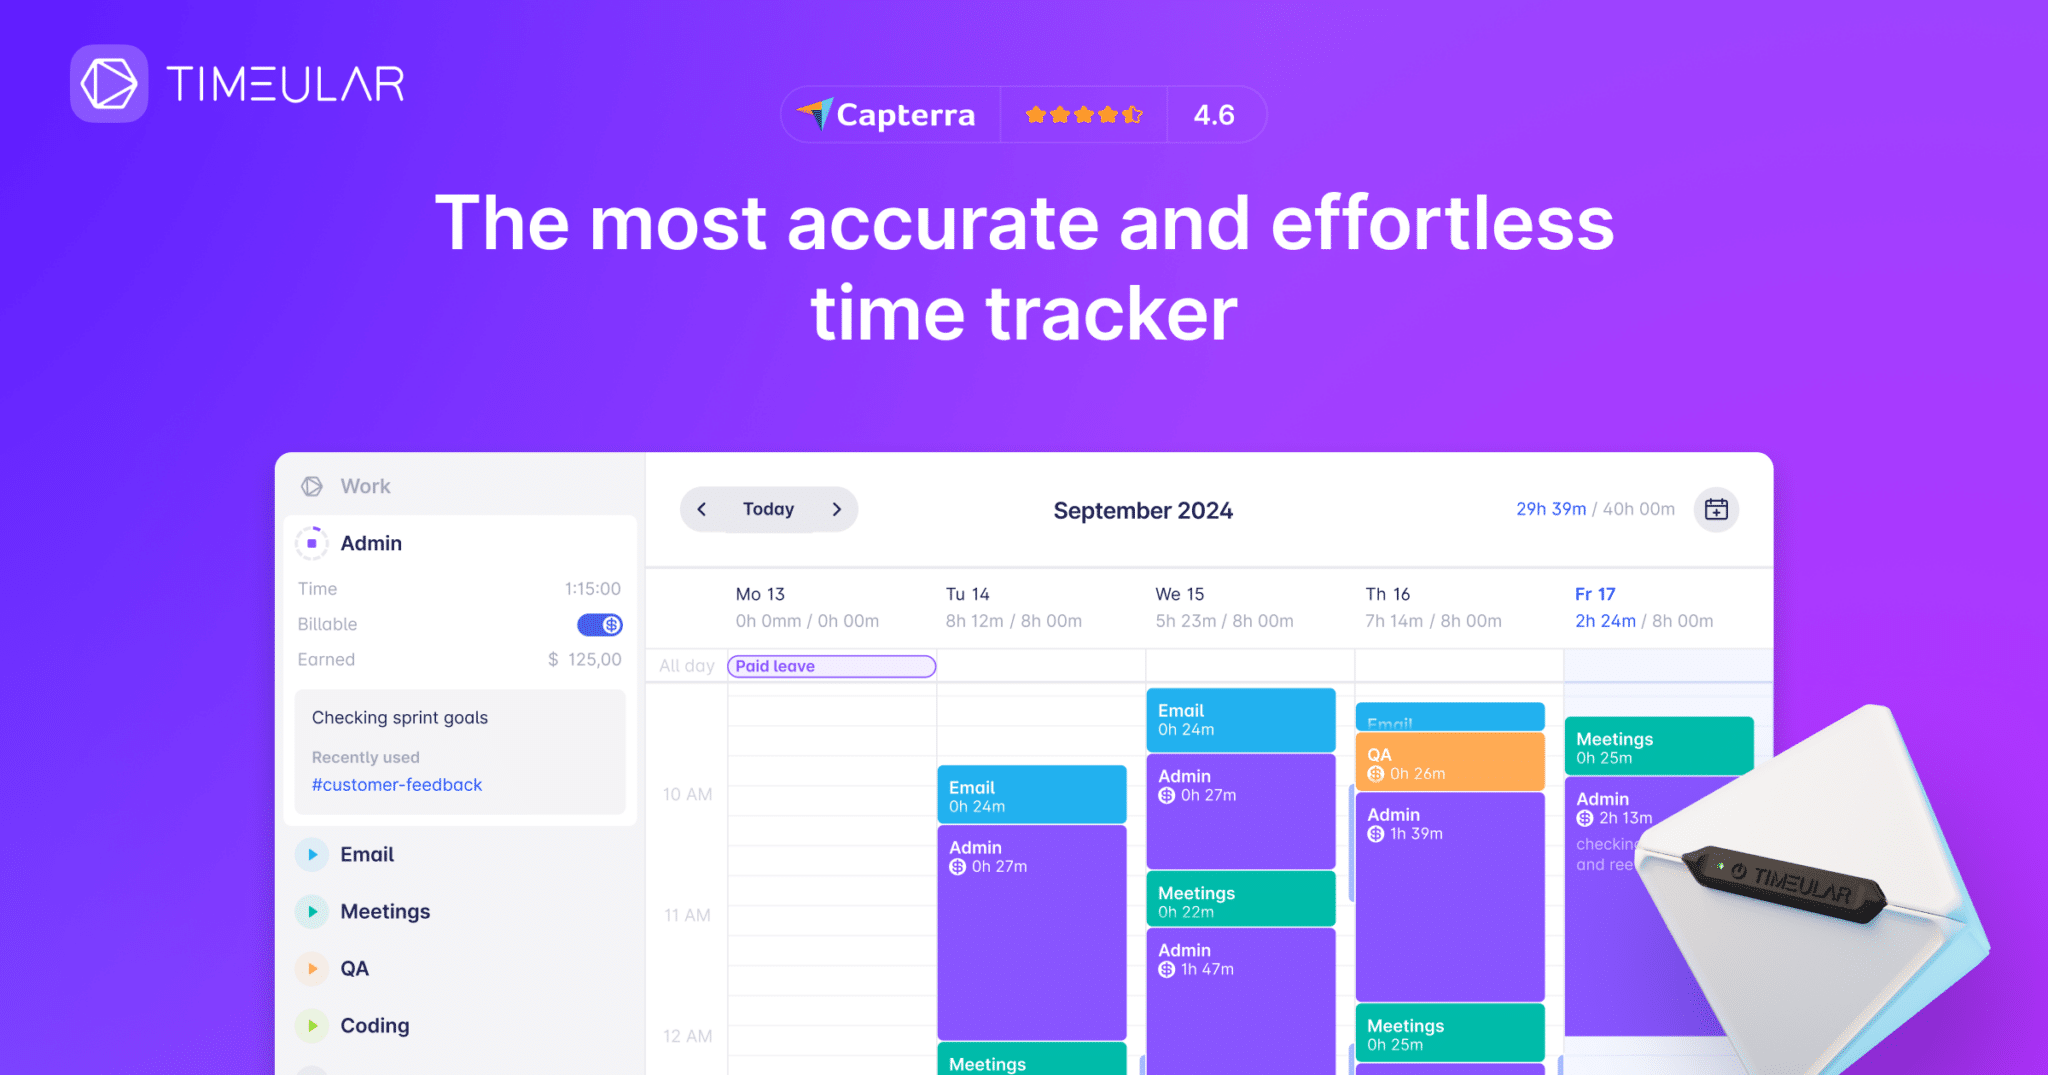 Preview image of website "Timeular – Time Tracking Software: Effortless, Smart, and Secure"